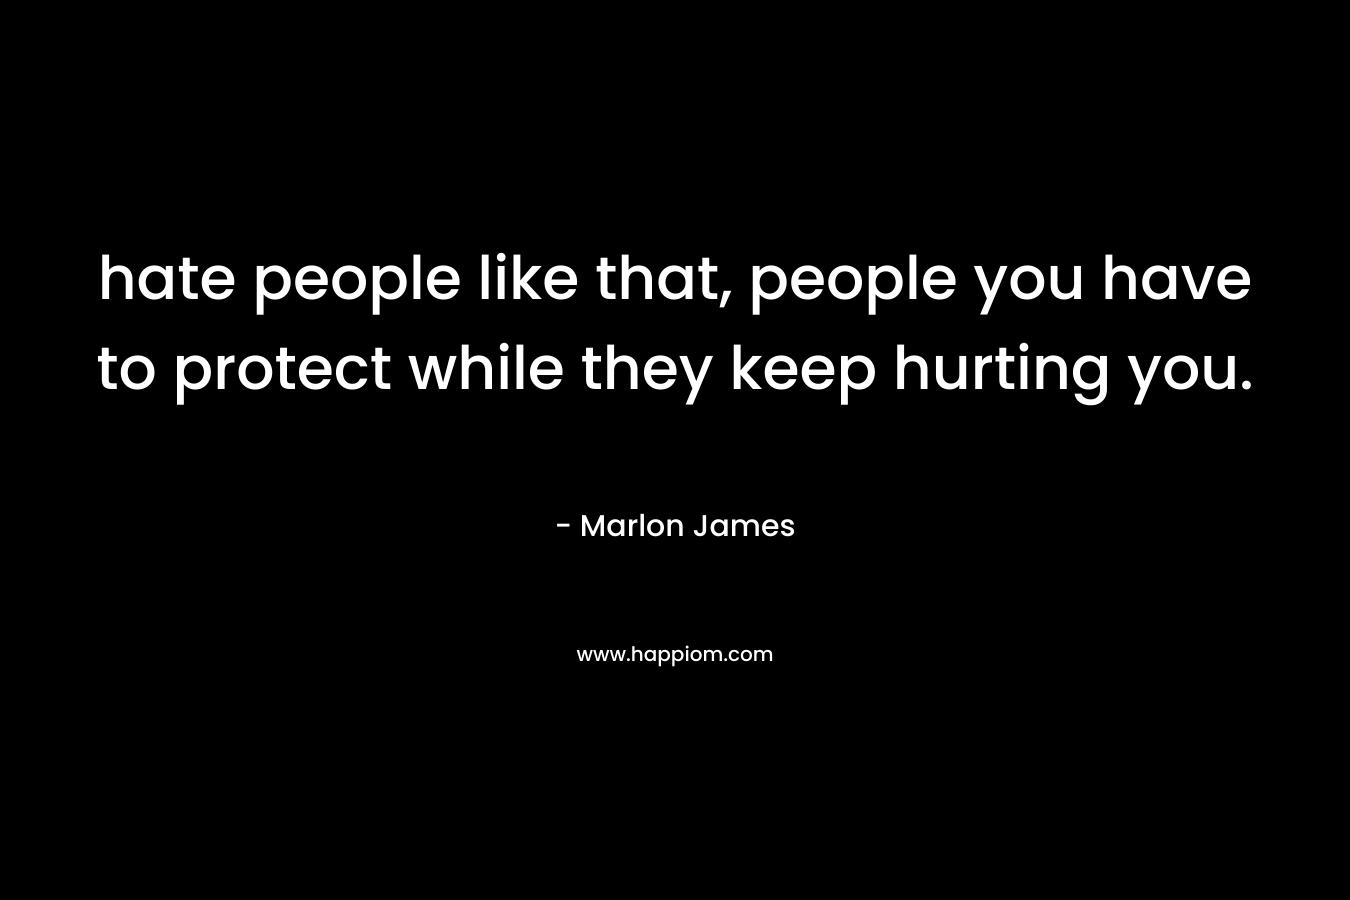 hate people like that, people you have to protect while they keep hurting you. – Marlon James